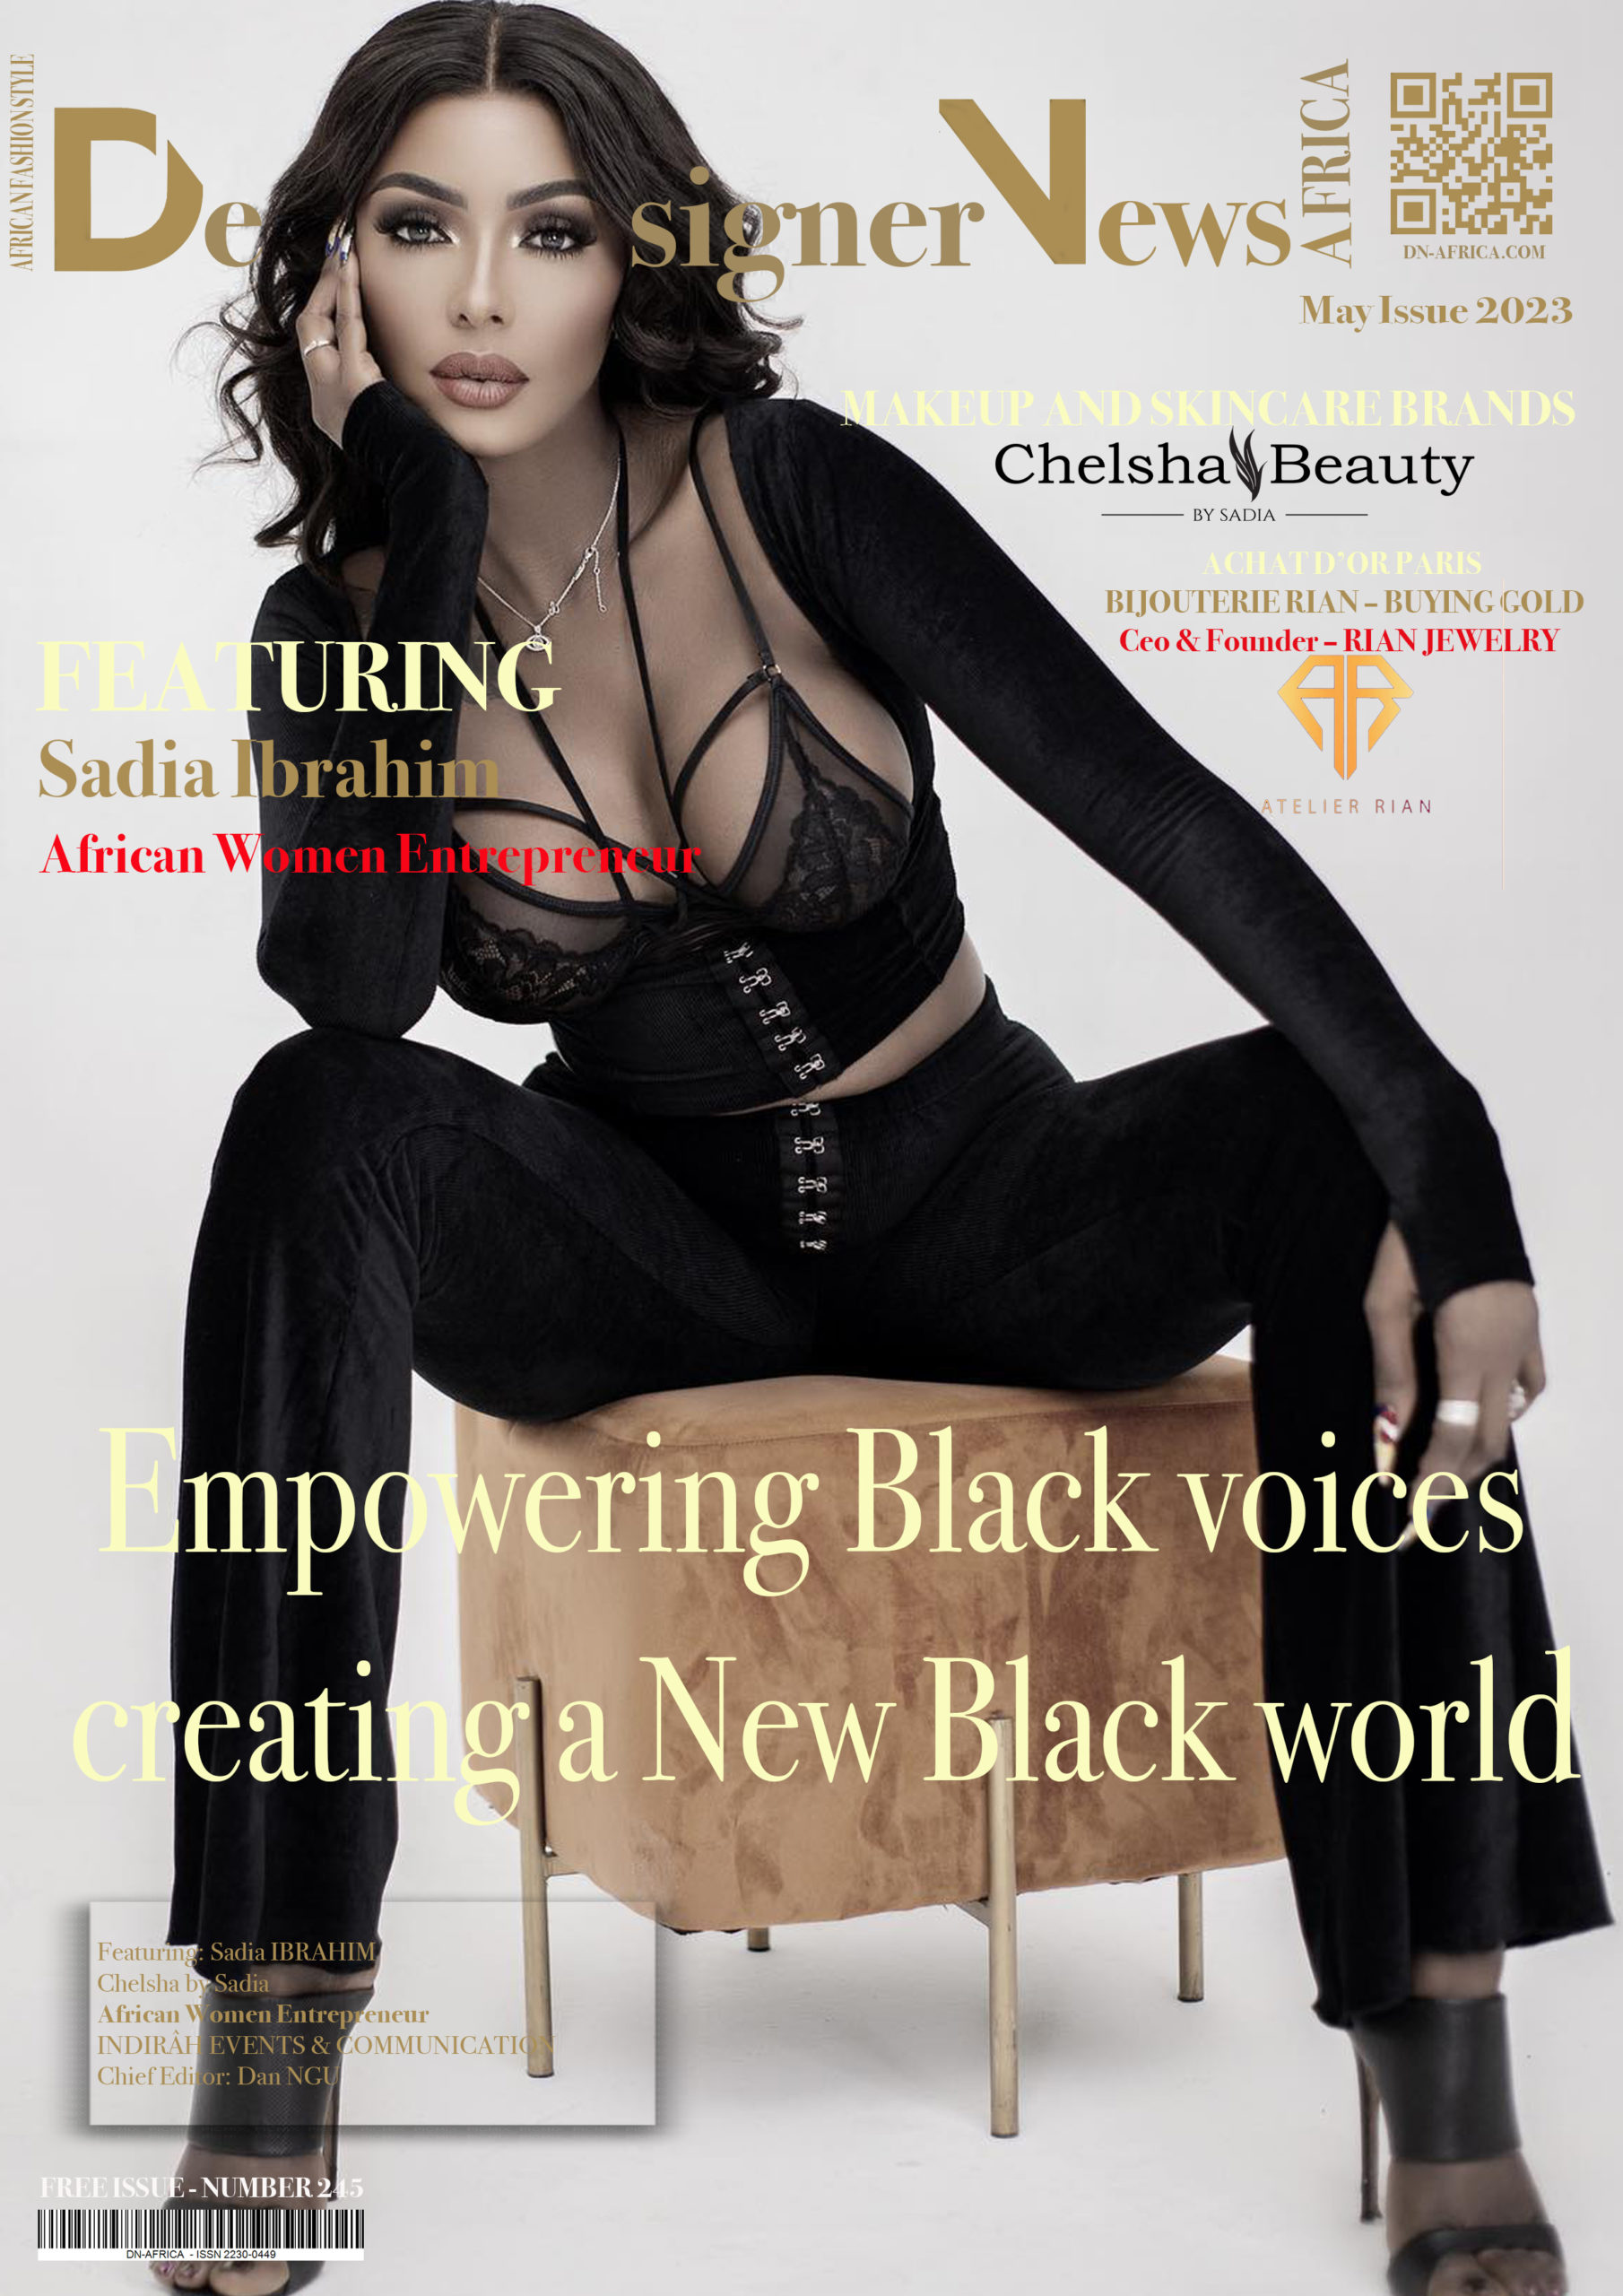 AFRICA-FASHION-STYLE-2490X3508-DN-AFRICA-COVER-NUMBER-245-MAY-8TH-2023-SADIA-IBRAHIM-AFRICAN-WOMAN-ENTREPRENEUR-DN-AfrICA-Media-Partner